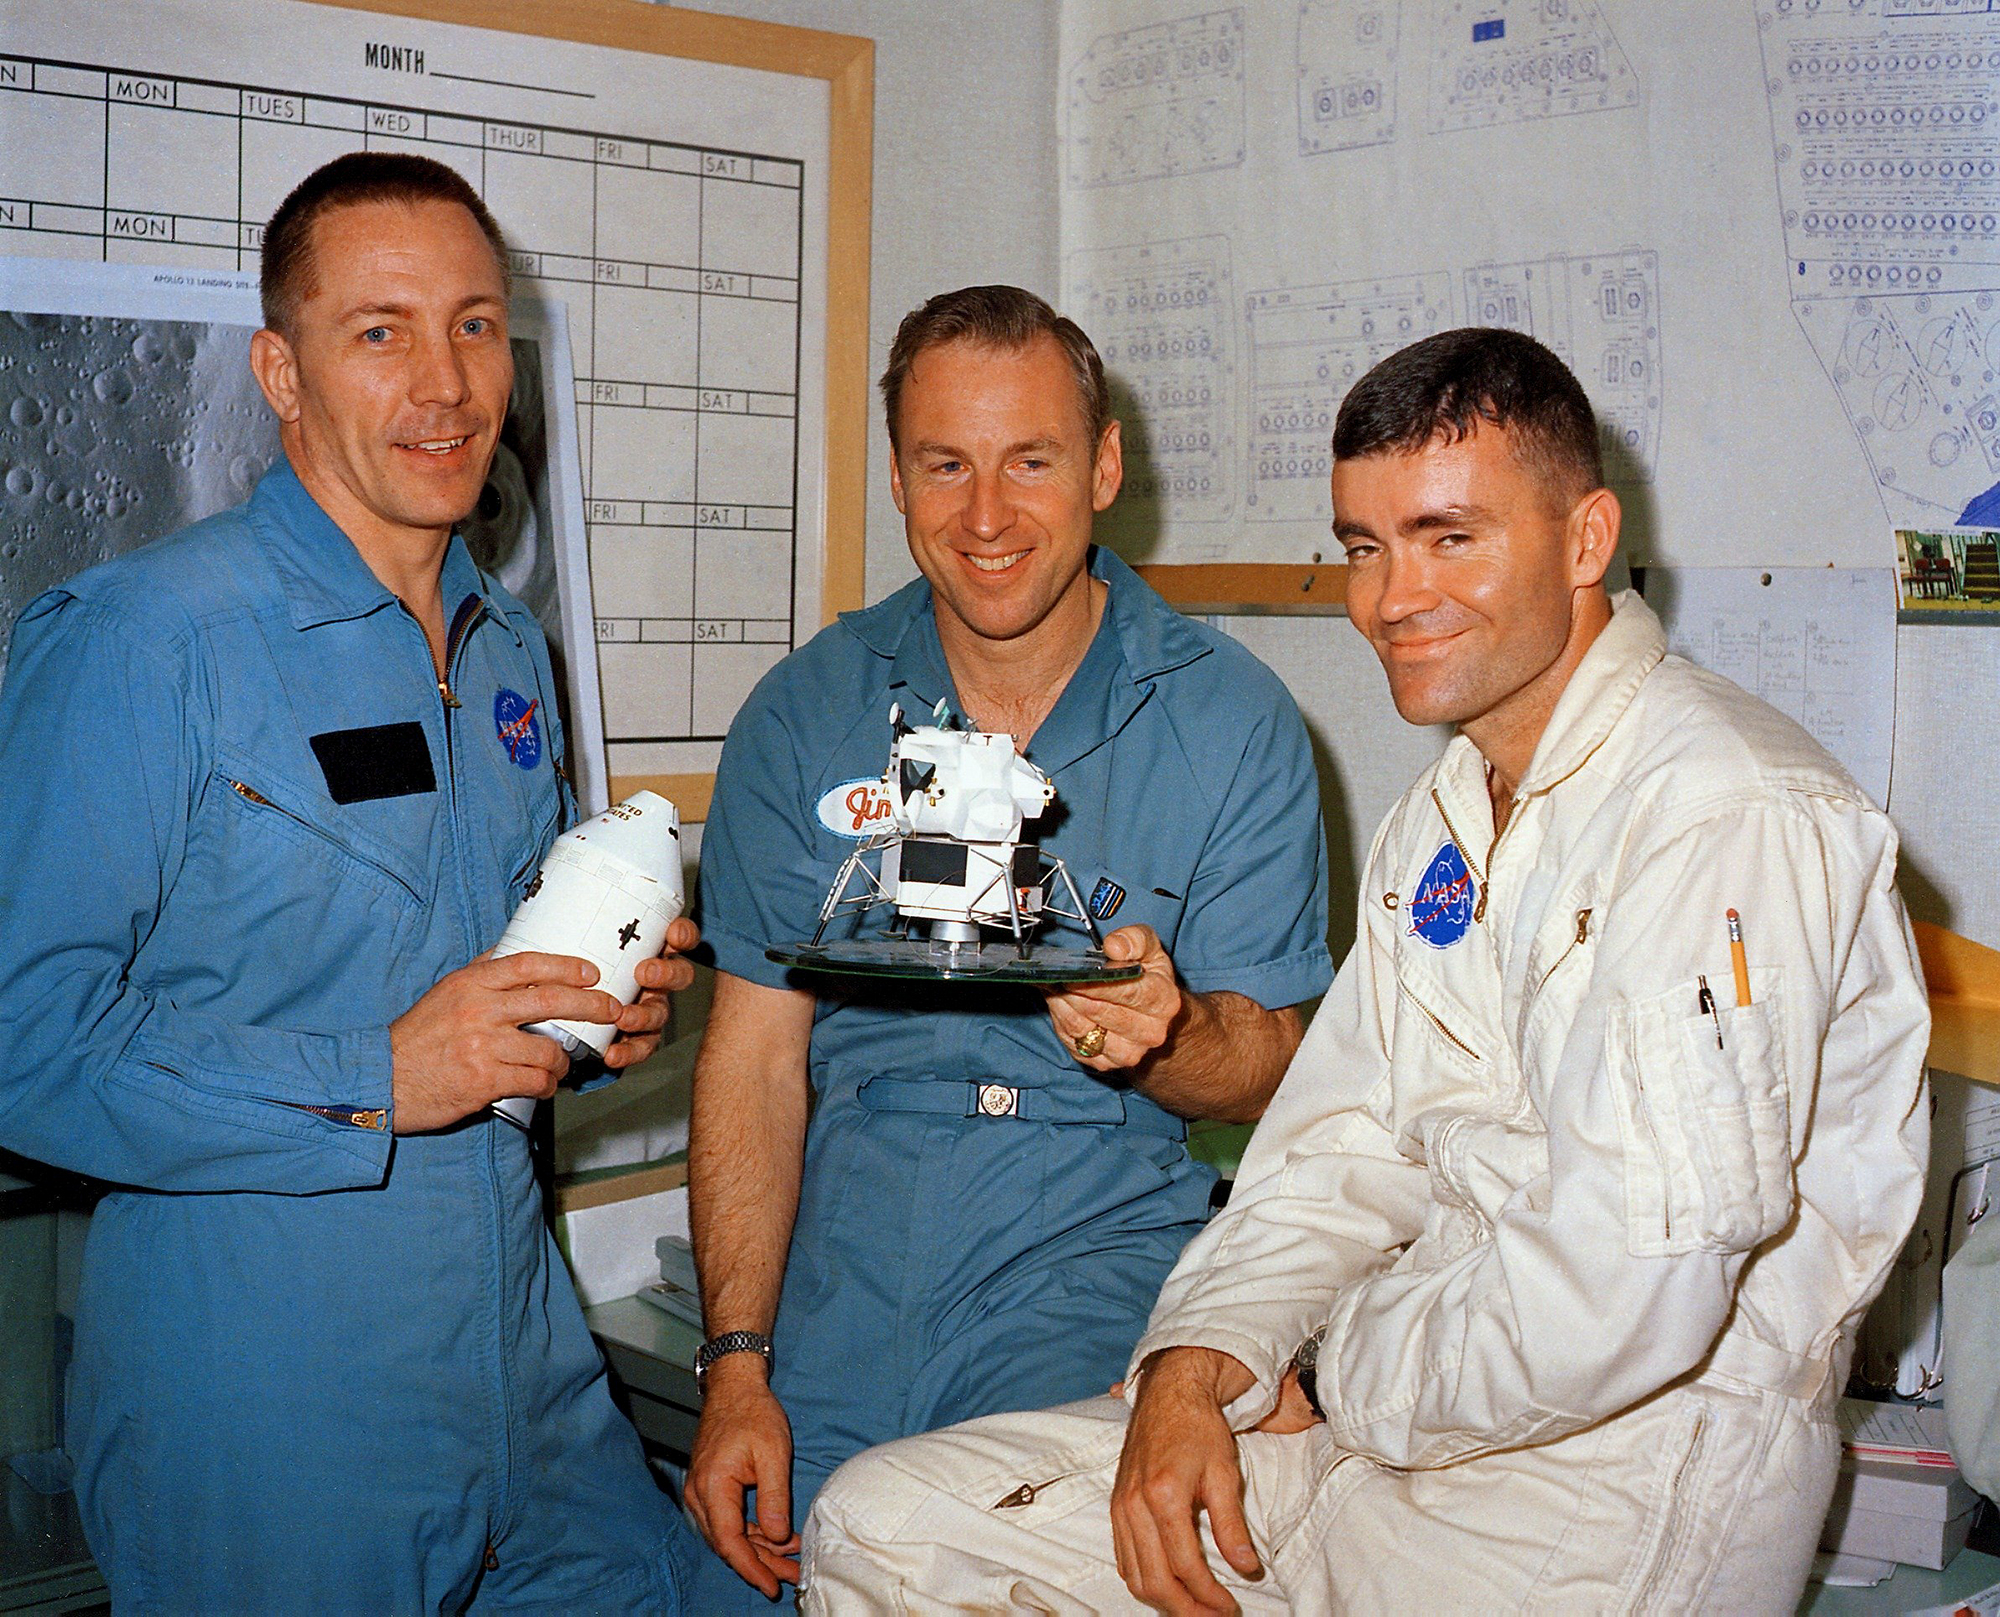 fred-haise-jack-swigert-and-jim-lovell-pose-on-the-day-before-launch-2.jpg